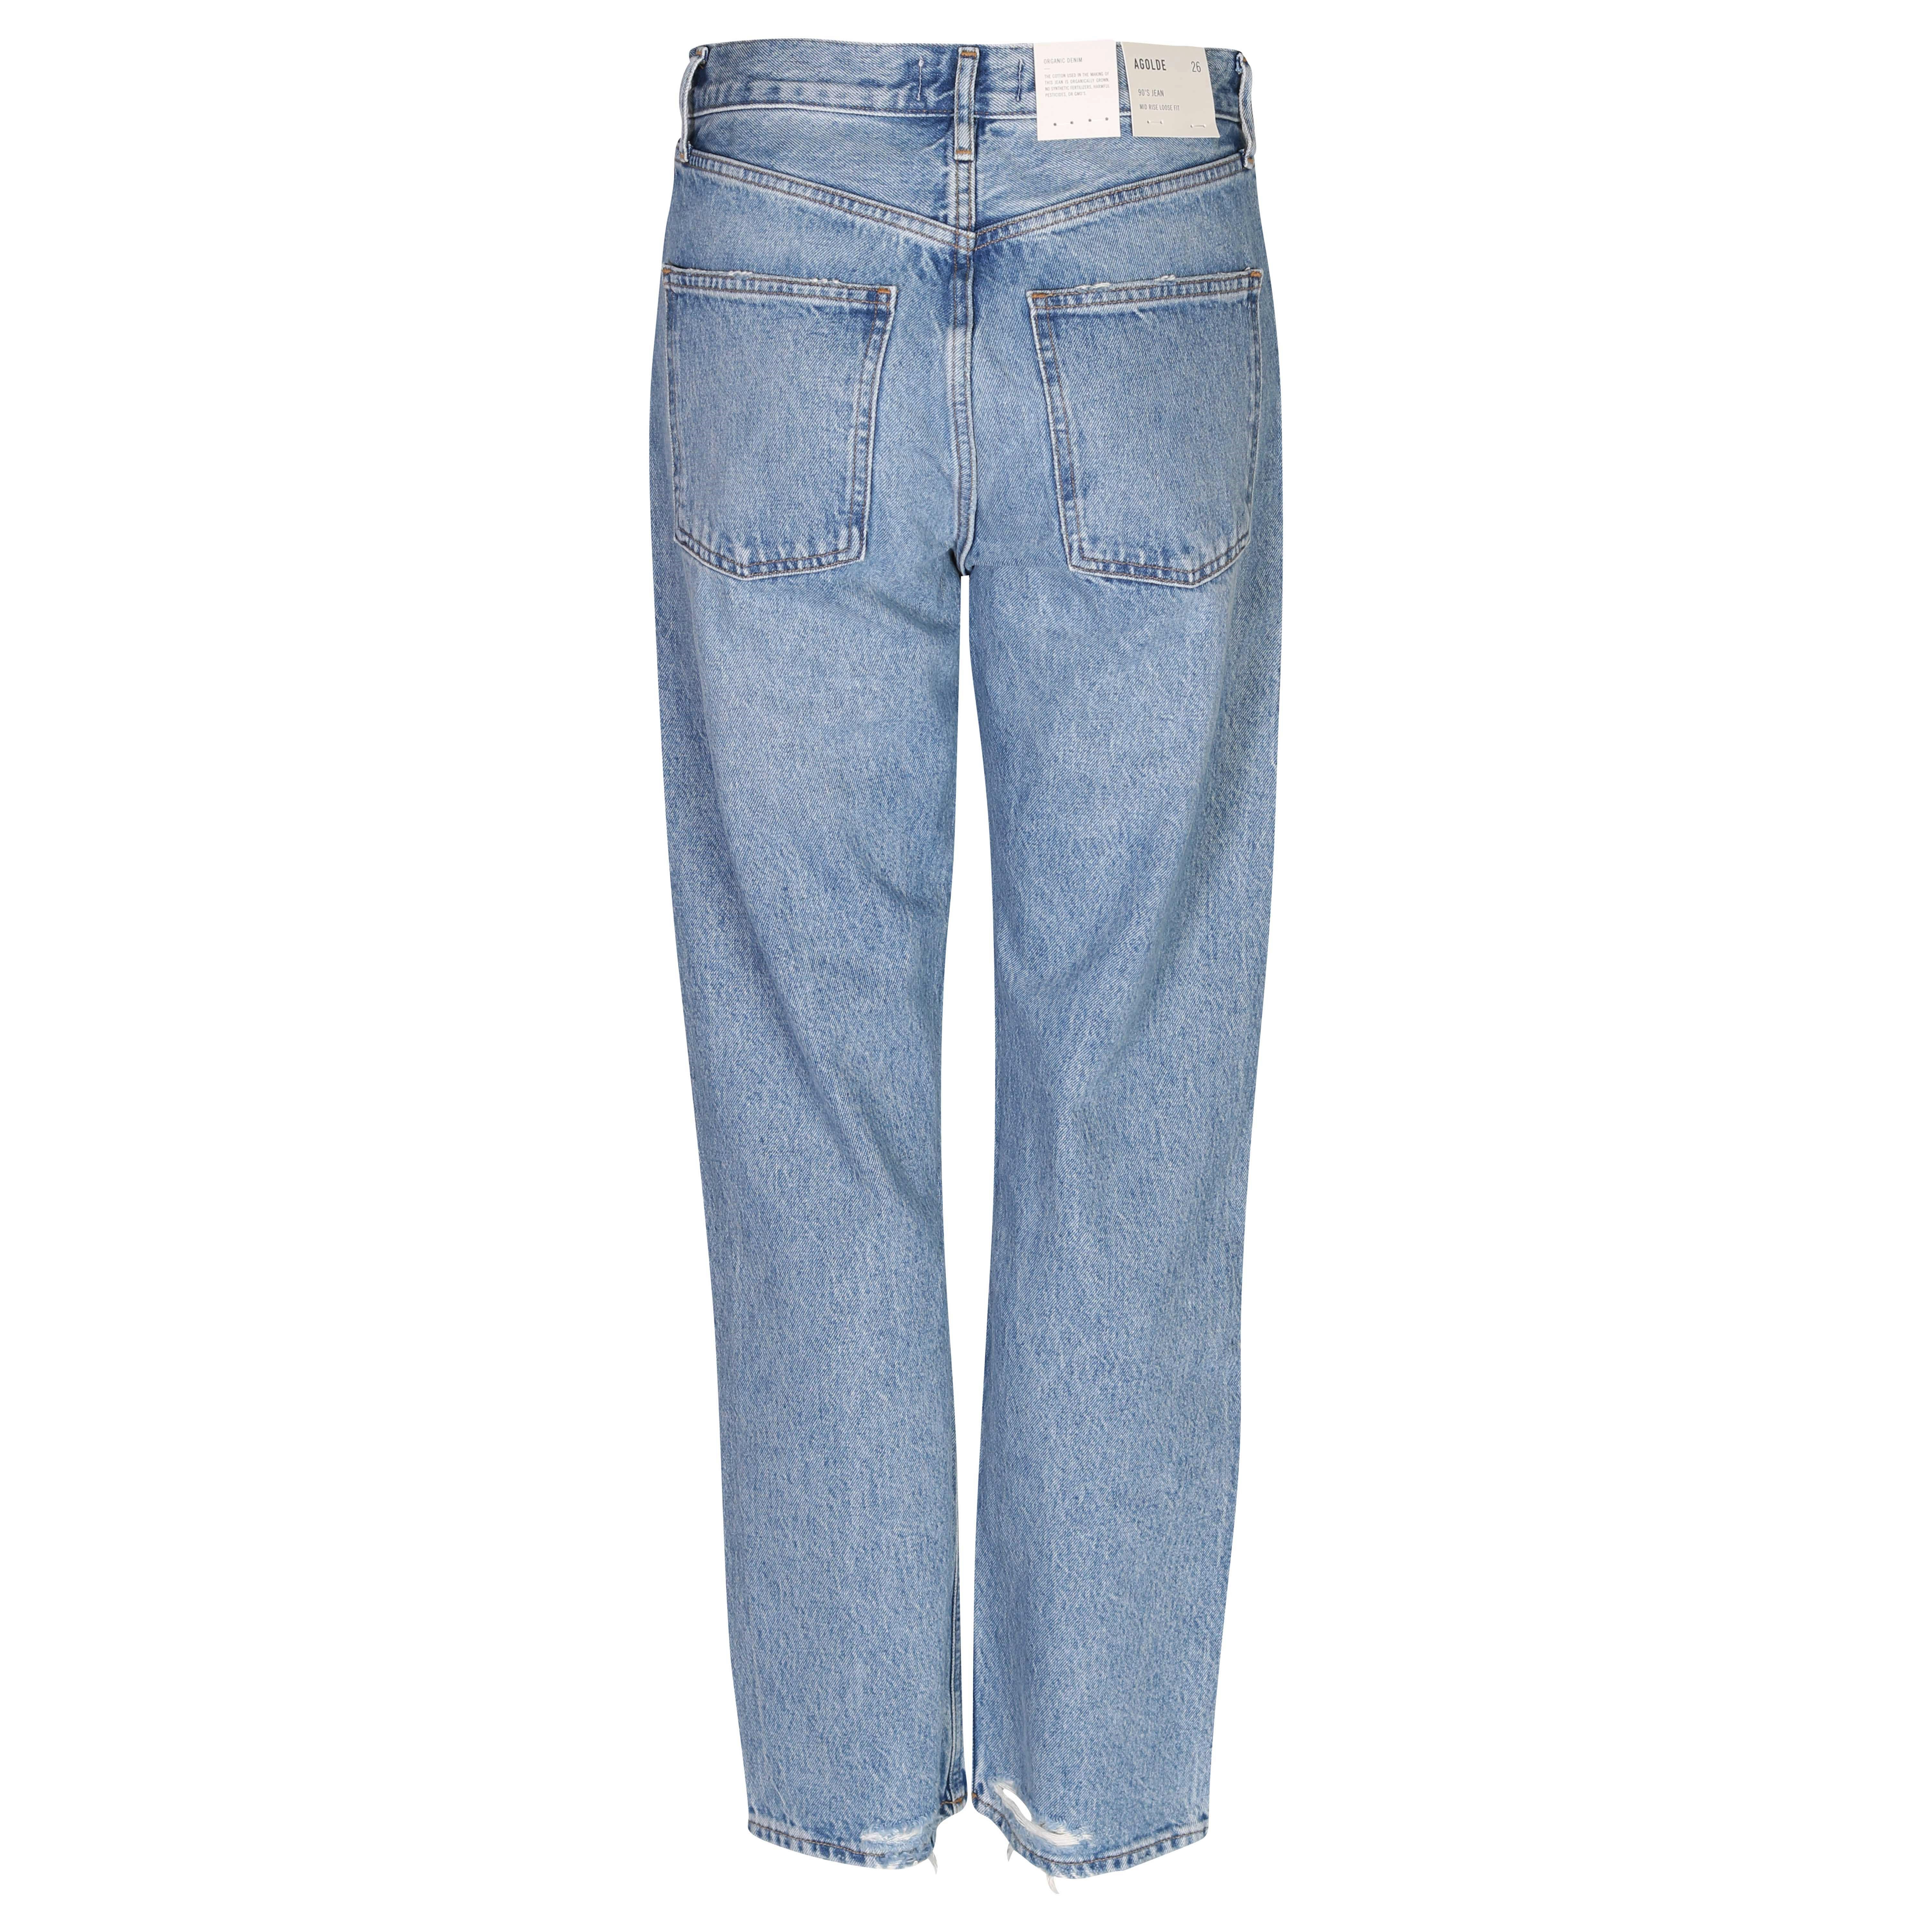 Agolde Jeans 90s Cropped in Scheme Washing W 24